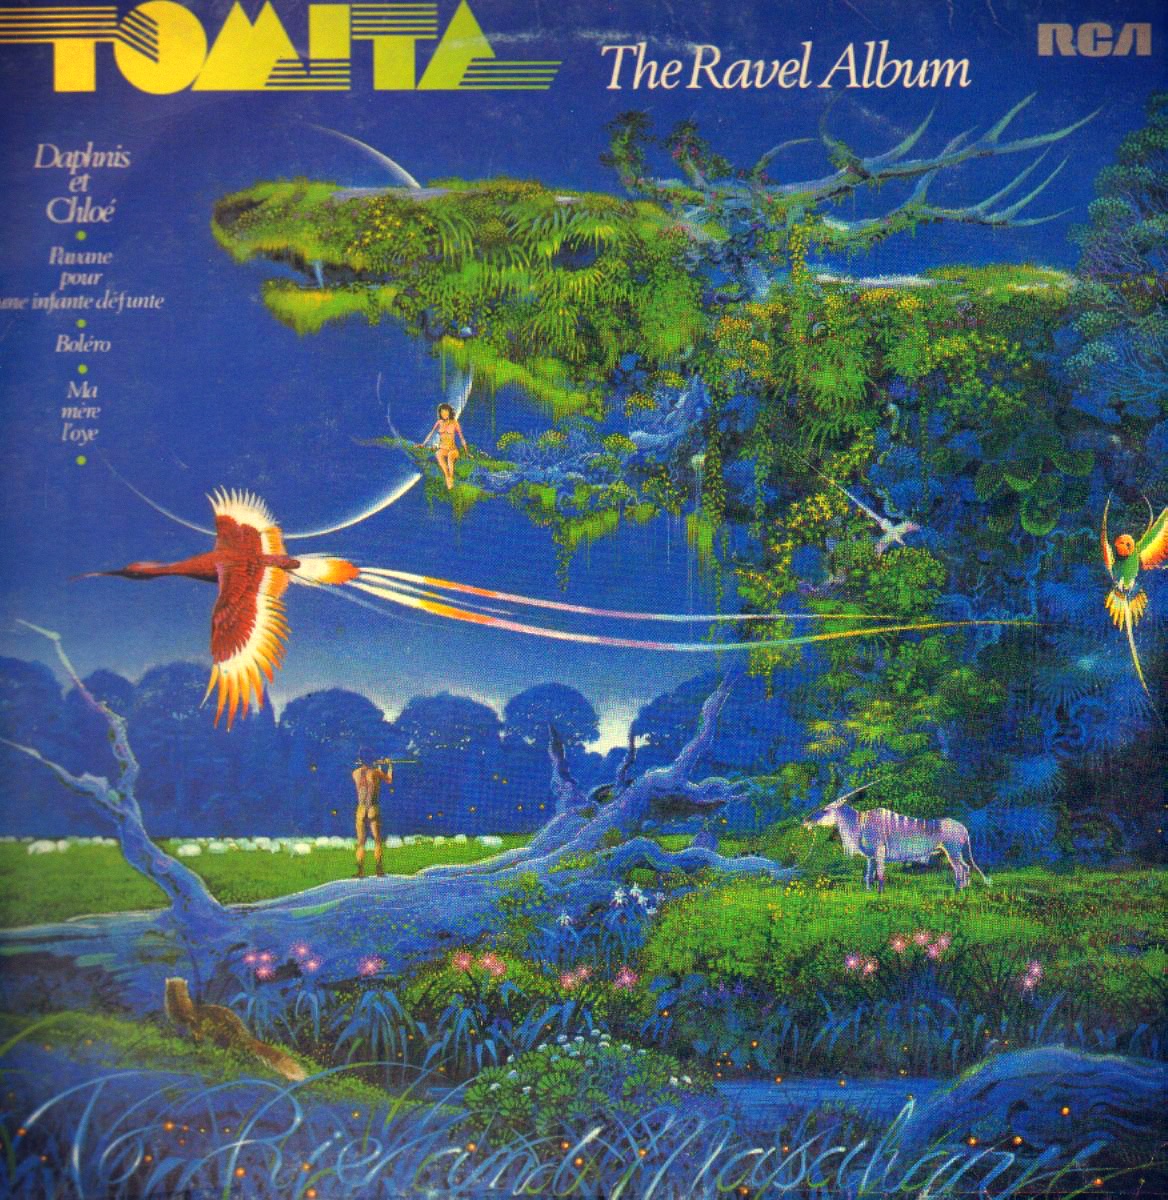 R.I.P. Isao Tomita, A Visionary of Outer or Inner Space Sounds